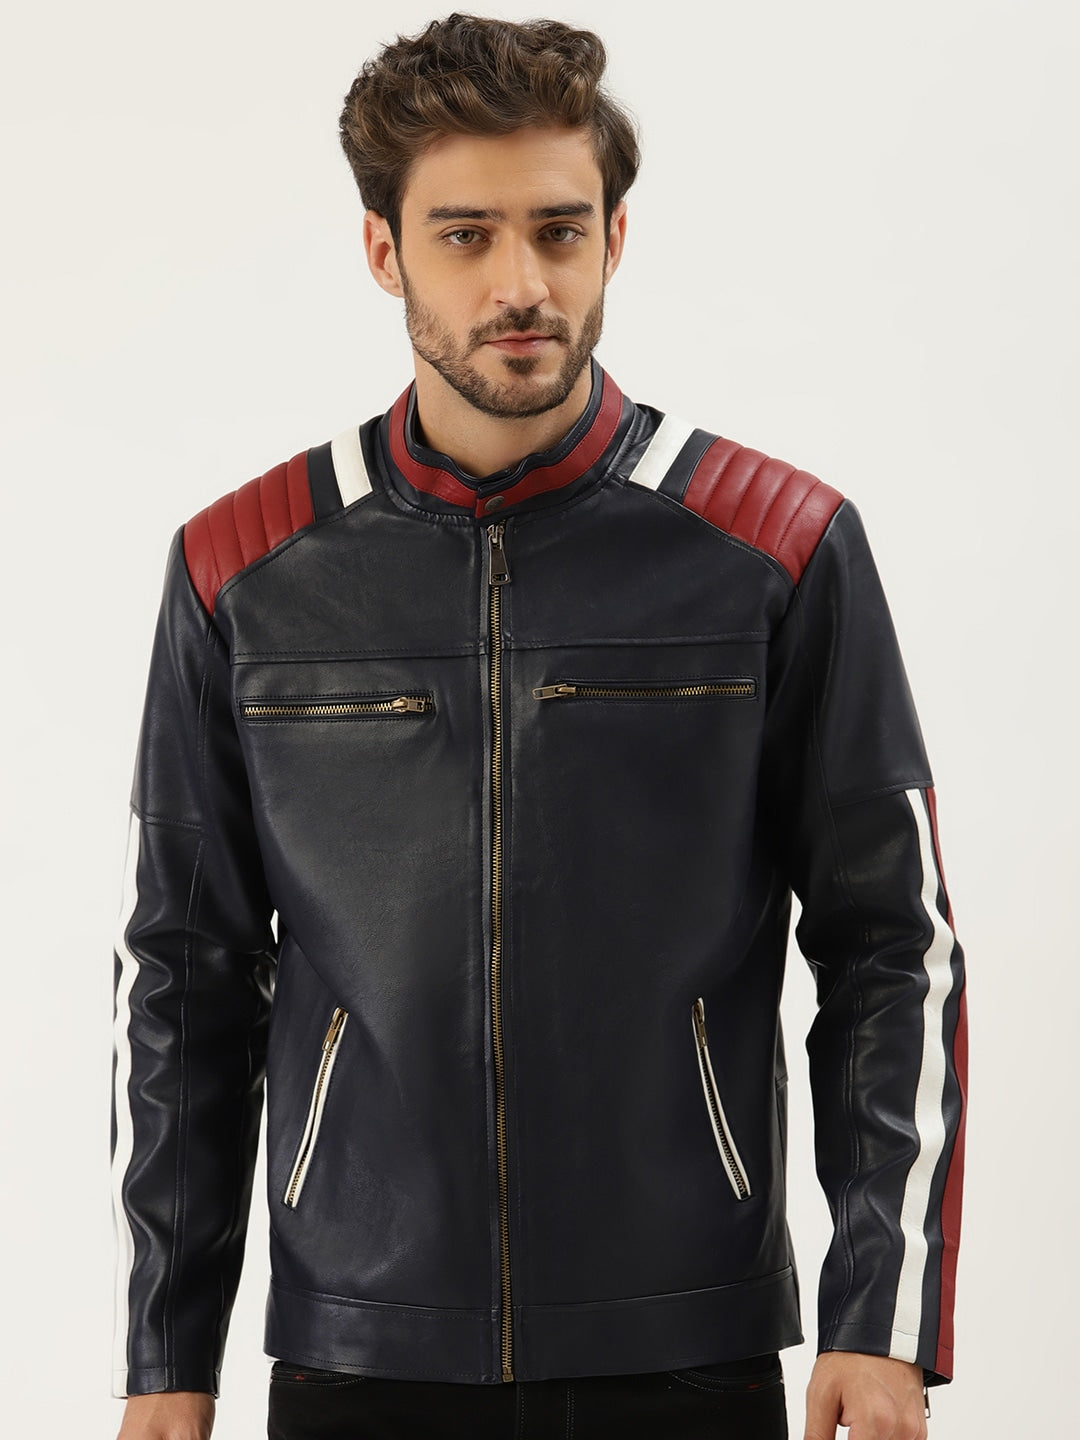 Shop Men Navy Blue Solid Leather Jacket | QAWACH